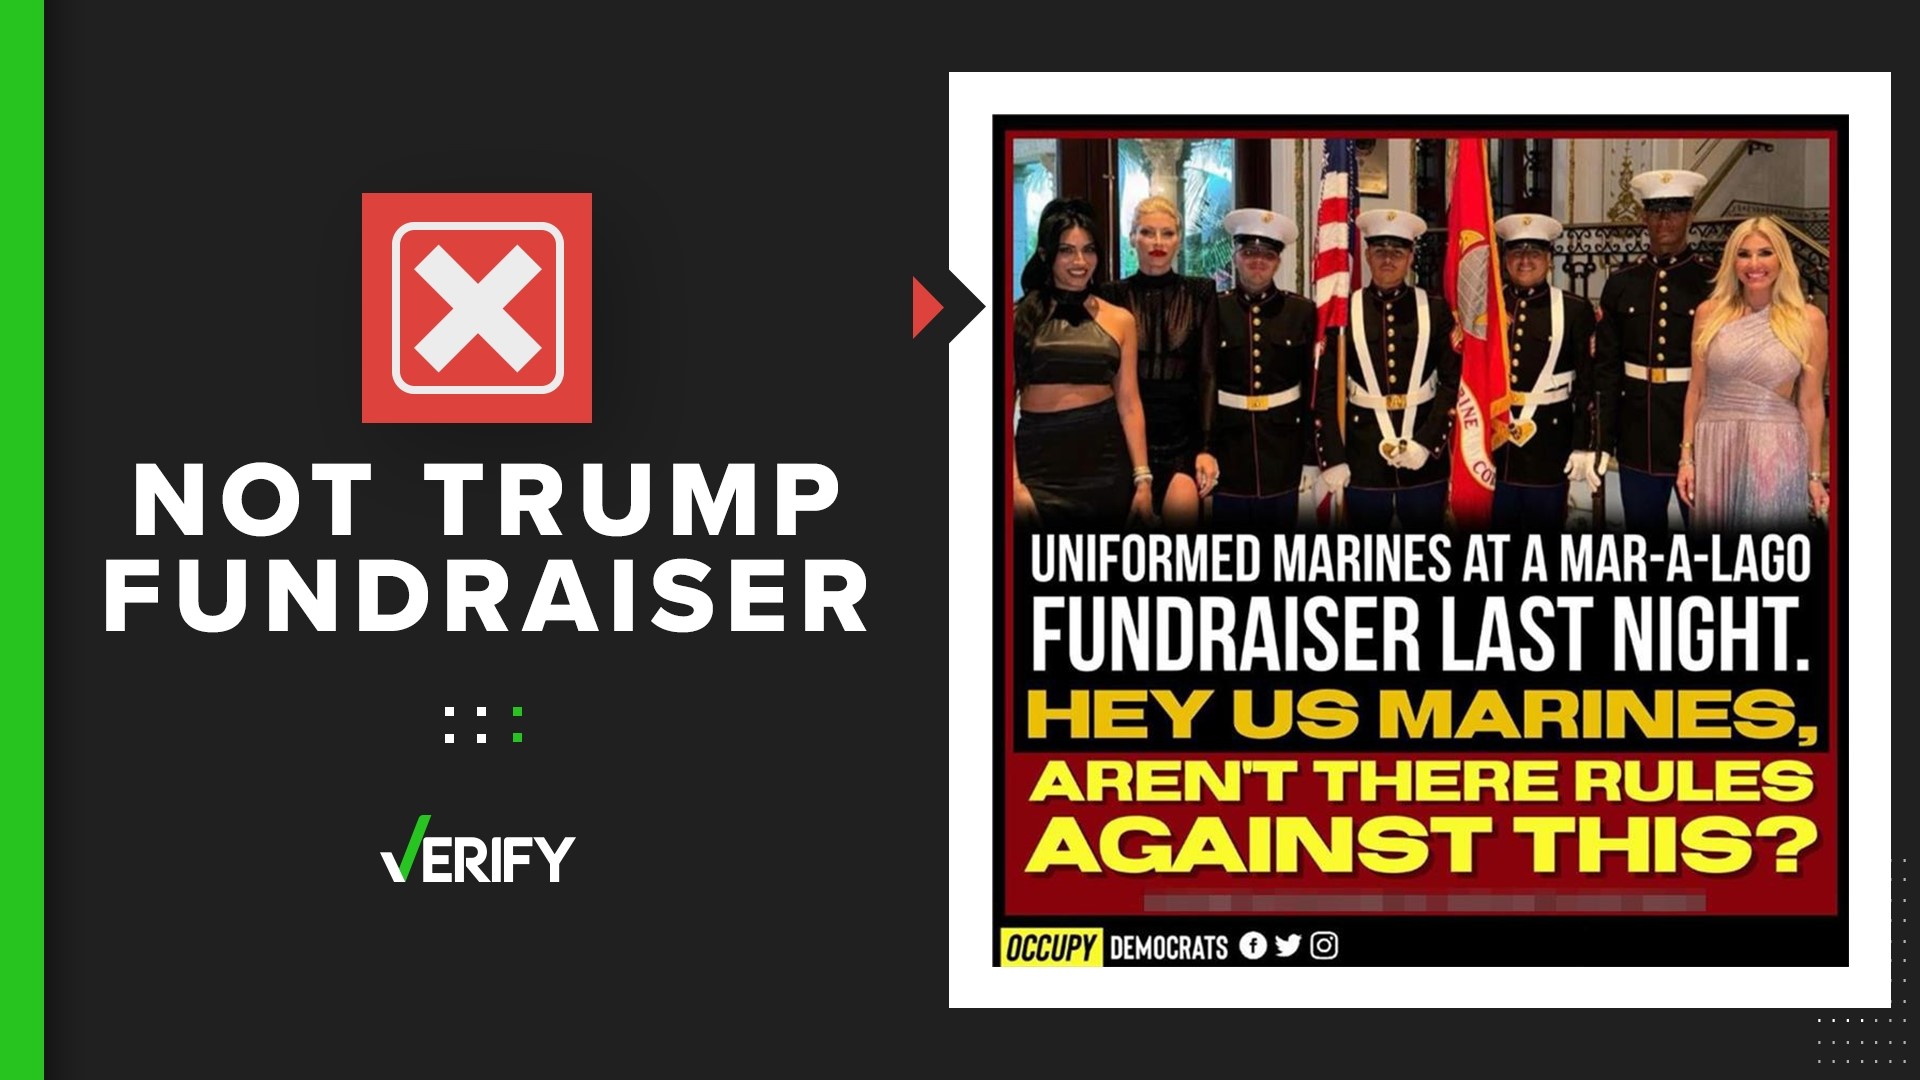 Four U.S. Marines attended a fundraiser for a charity seeking to reduce veteran suicides at the Mar-a-Lago Club.